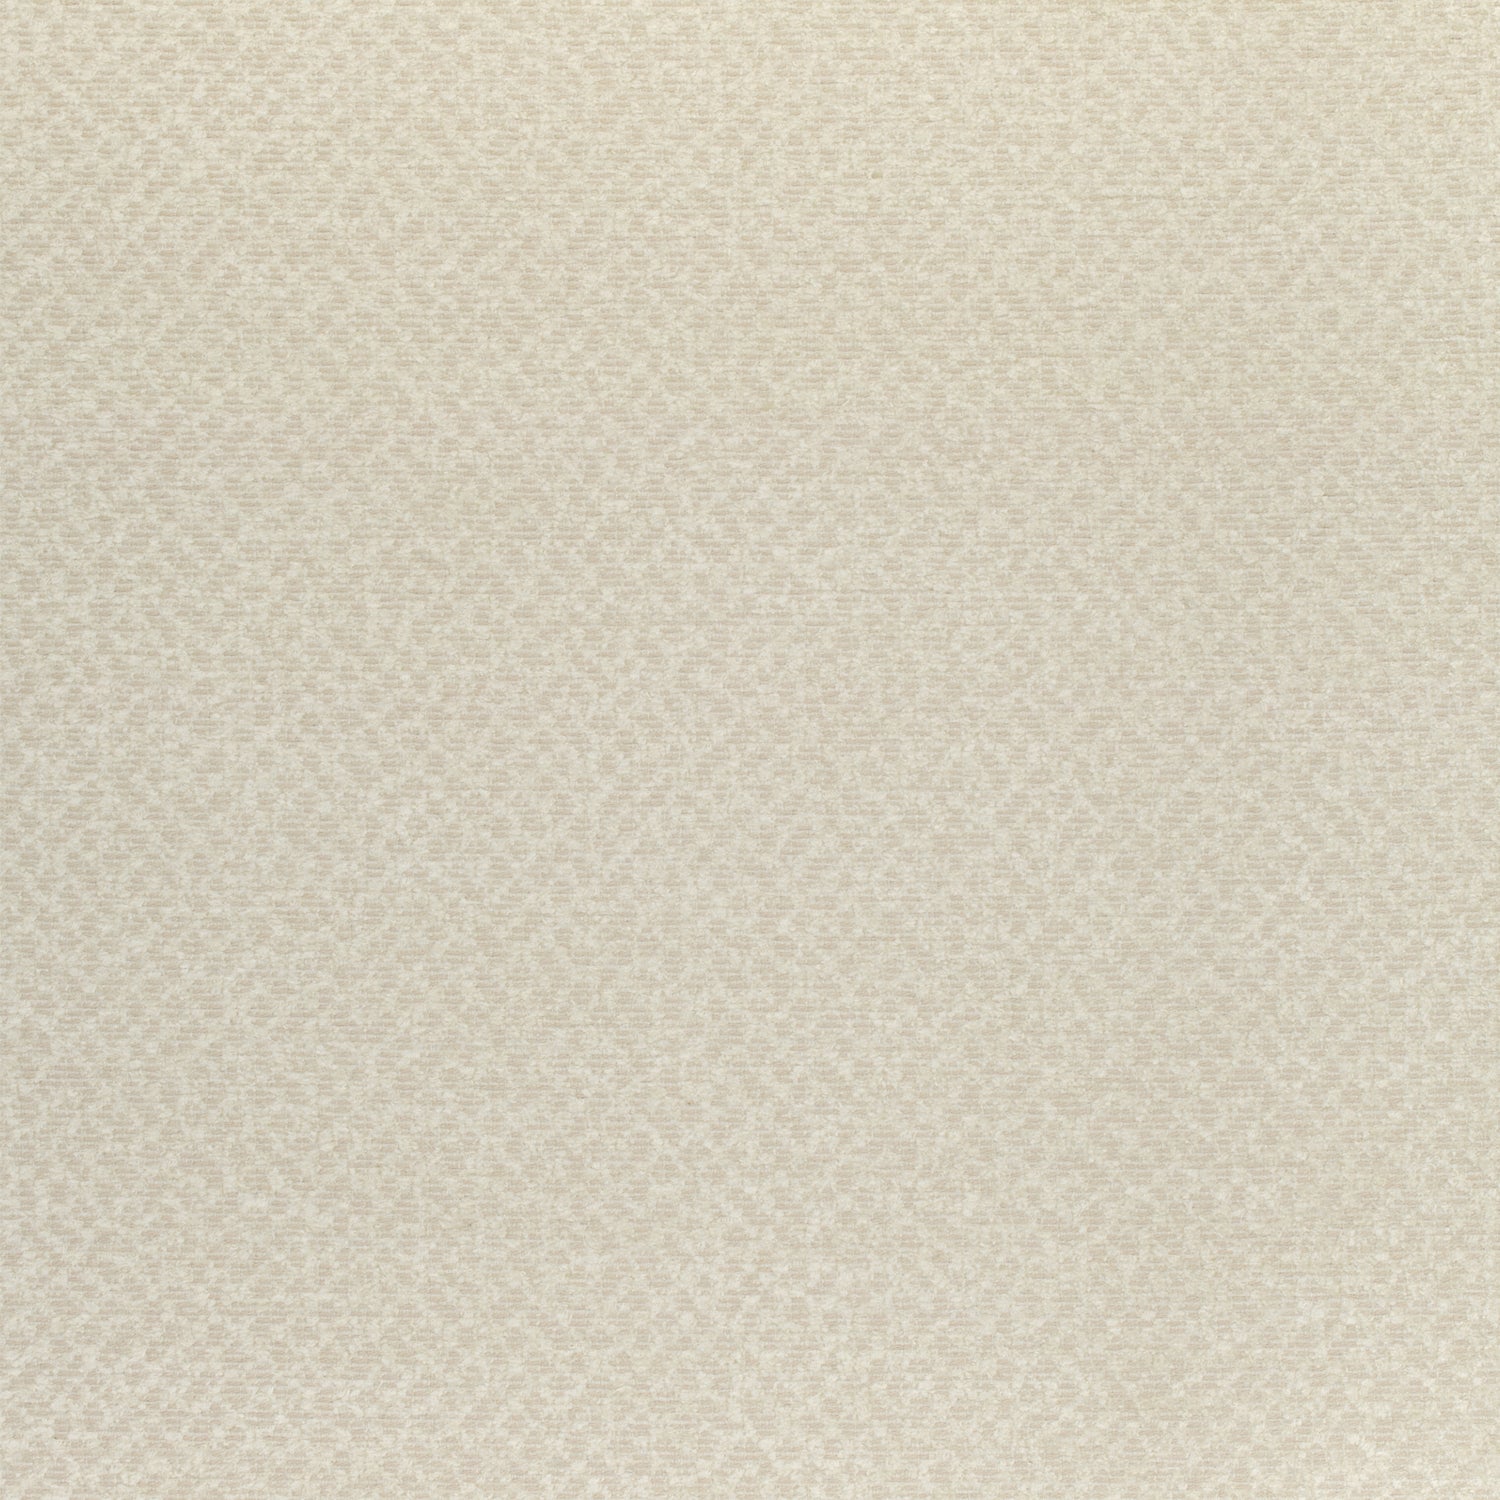 Gryffin fabric in almond color - pattern number W80409 - by Thibaut in the Mosaic collection